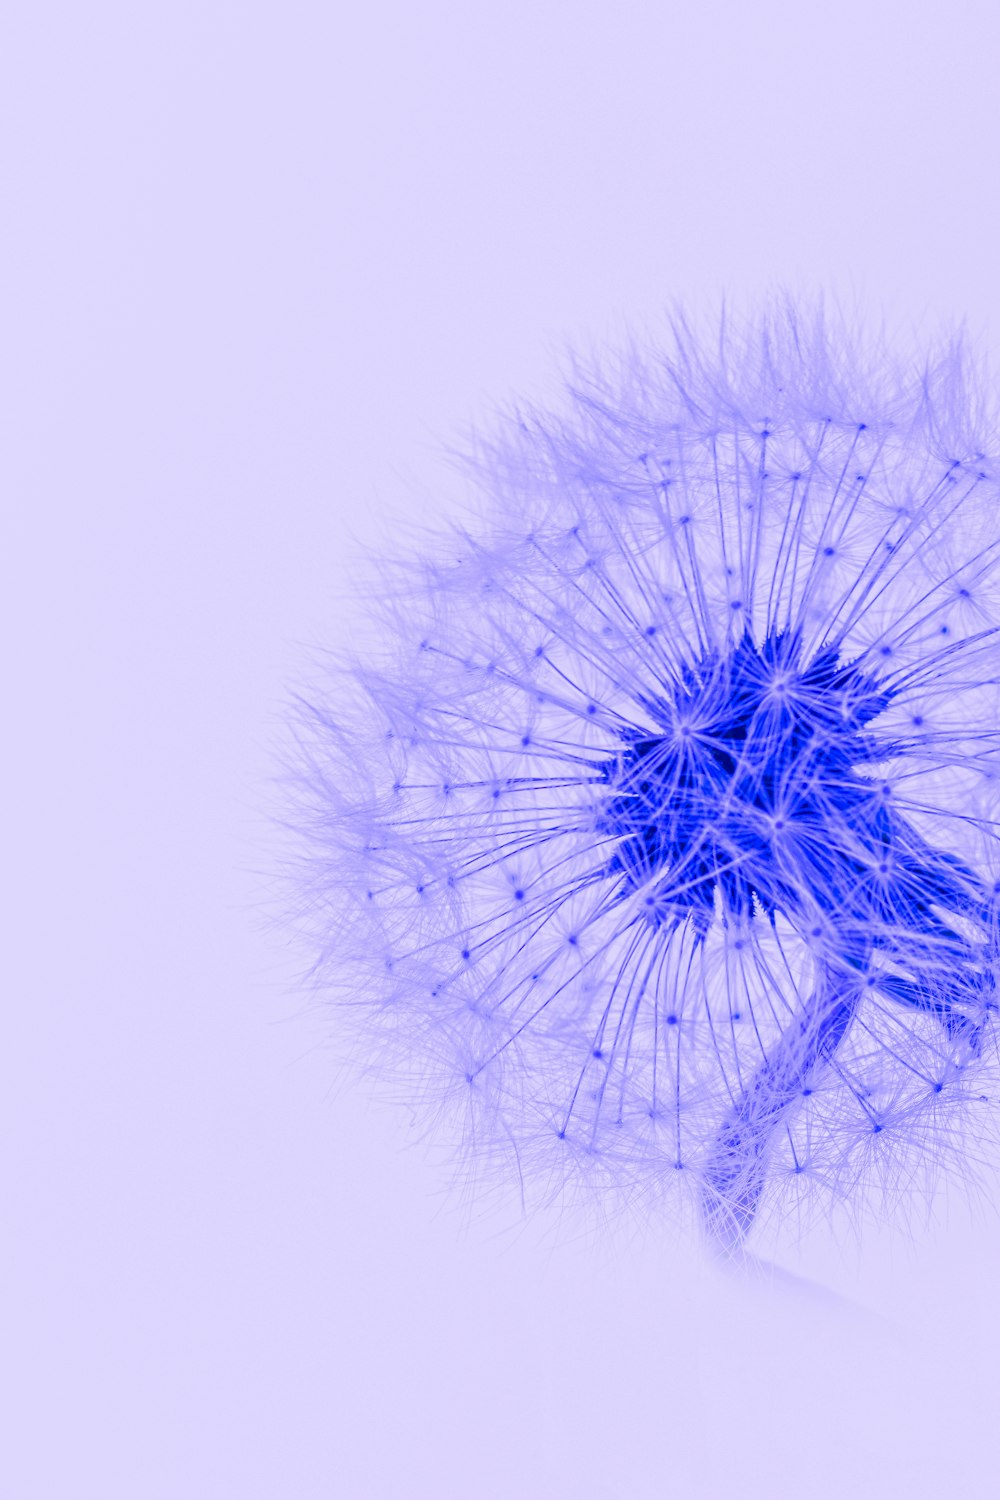 a dandelion with a blue center on a white background